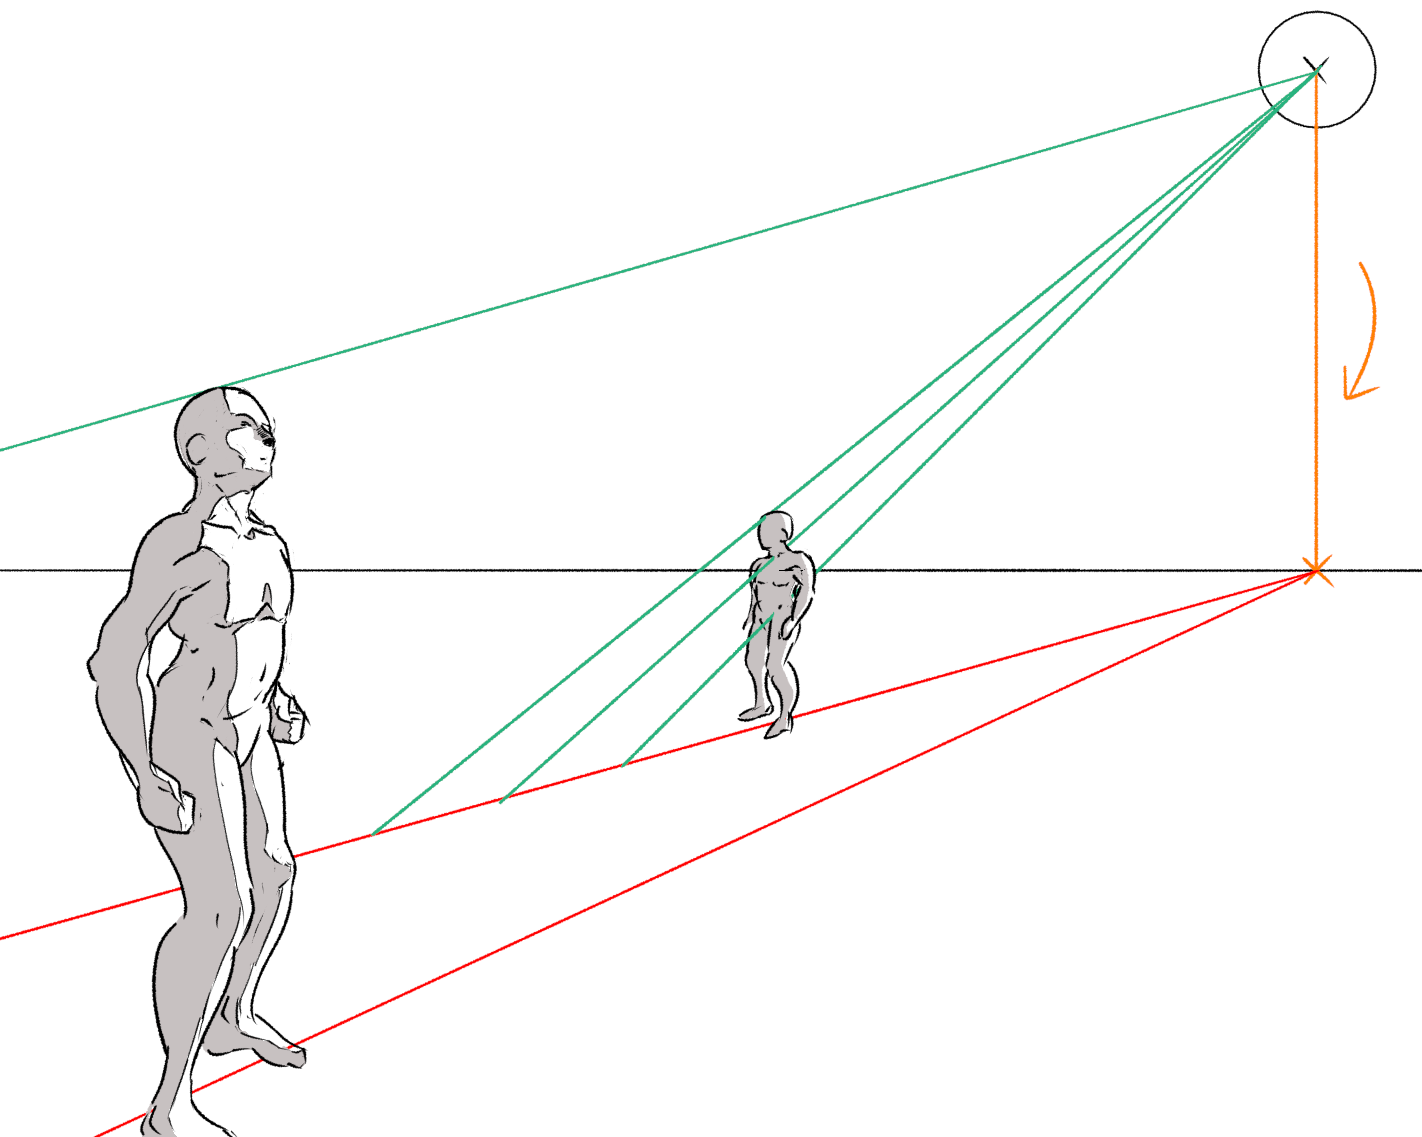 Light rays are drawn through the figures until they hit the baseline.